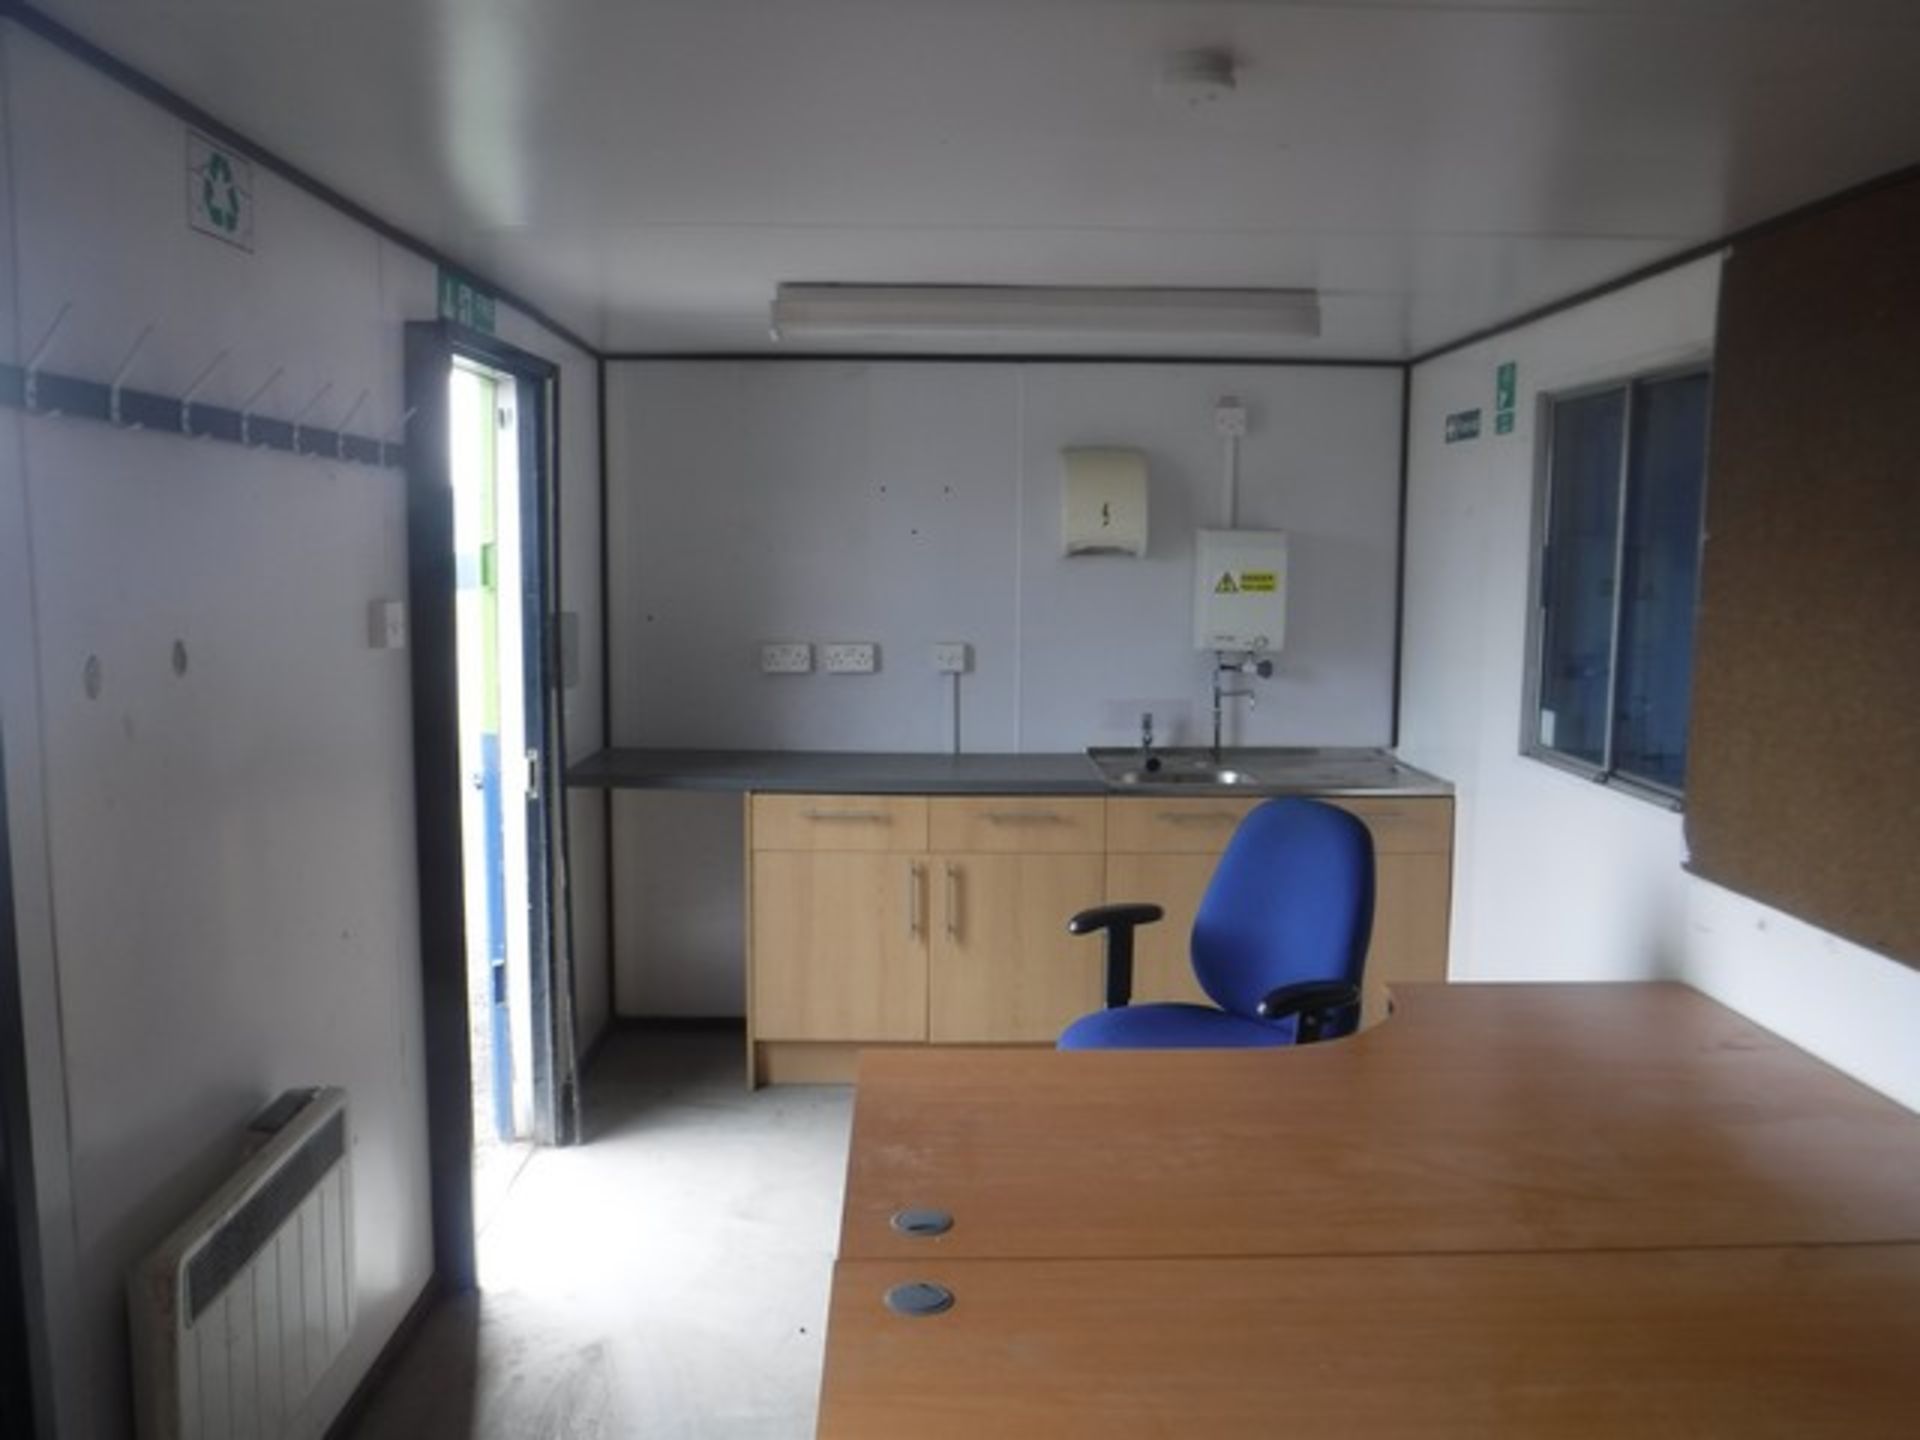 24ft OFFICE with small store & chemical toilet. Toilet door seazed. S/N PF277. No 011. - Image 4 of 5